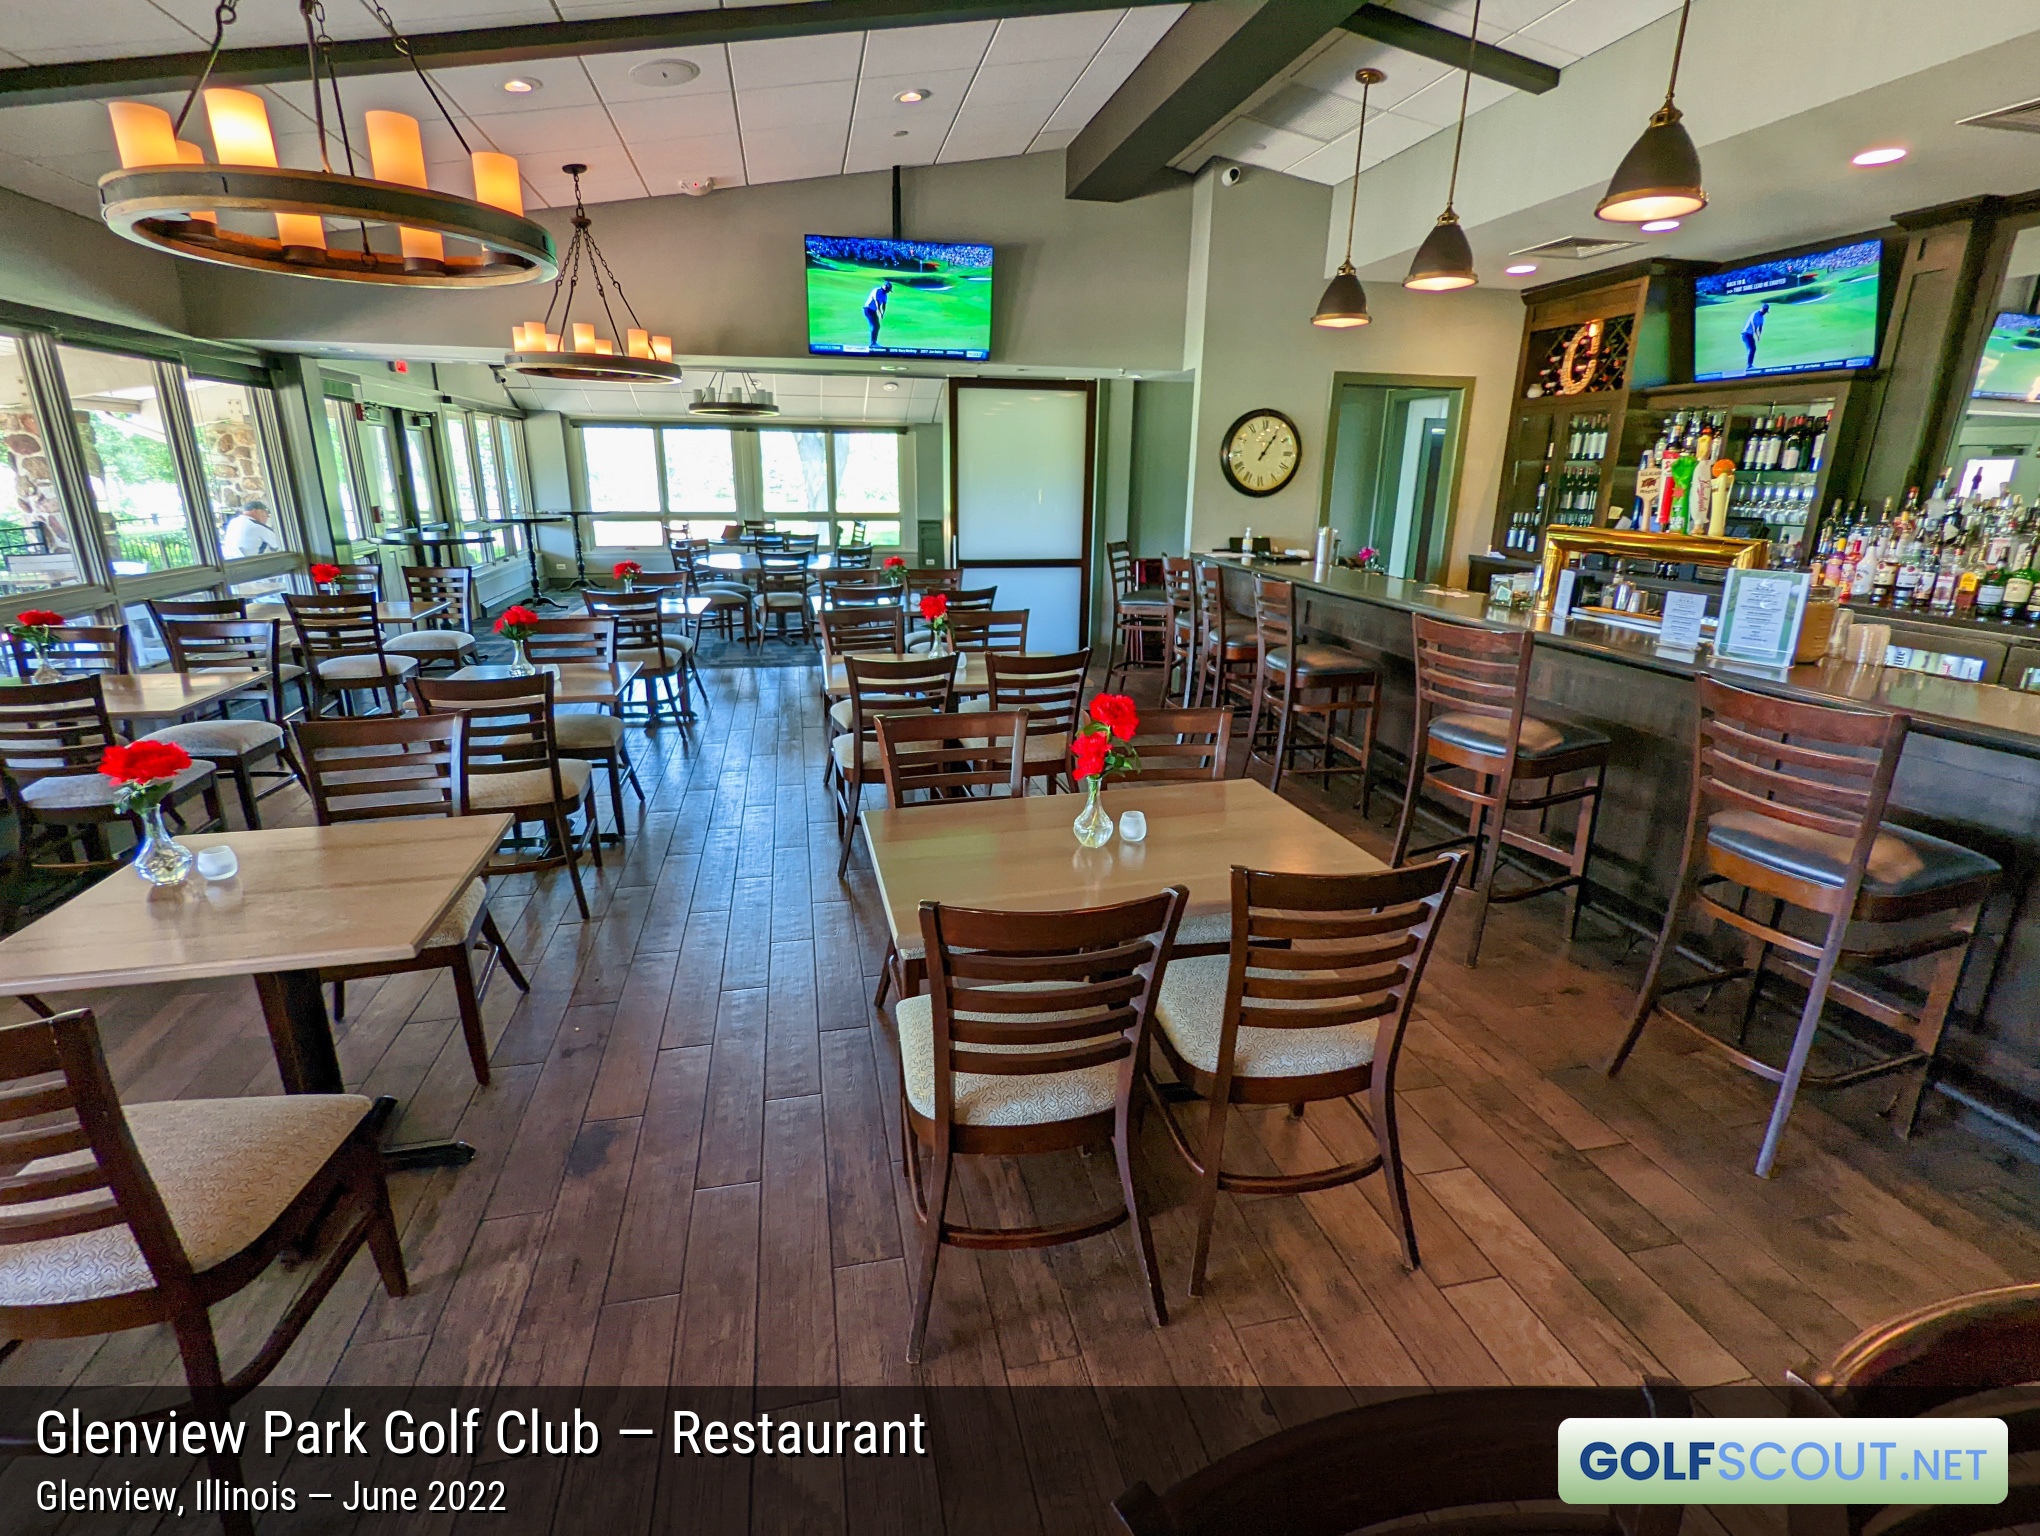 Photo of the restaurant at Glenview Park Golf Club in Glenview, Illinois. 